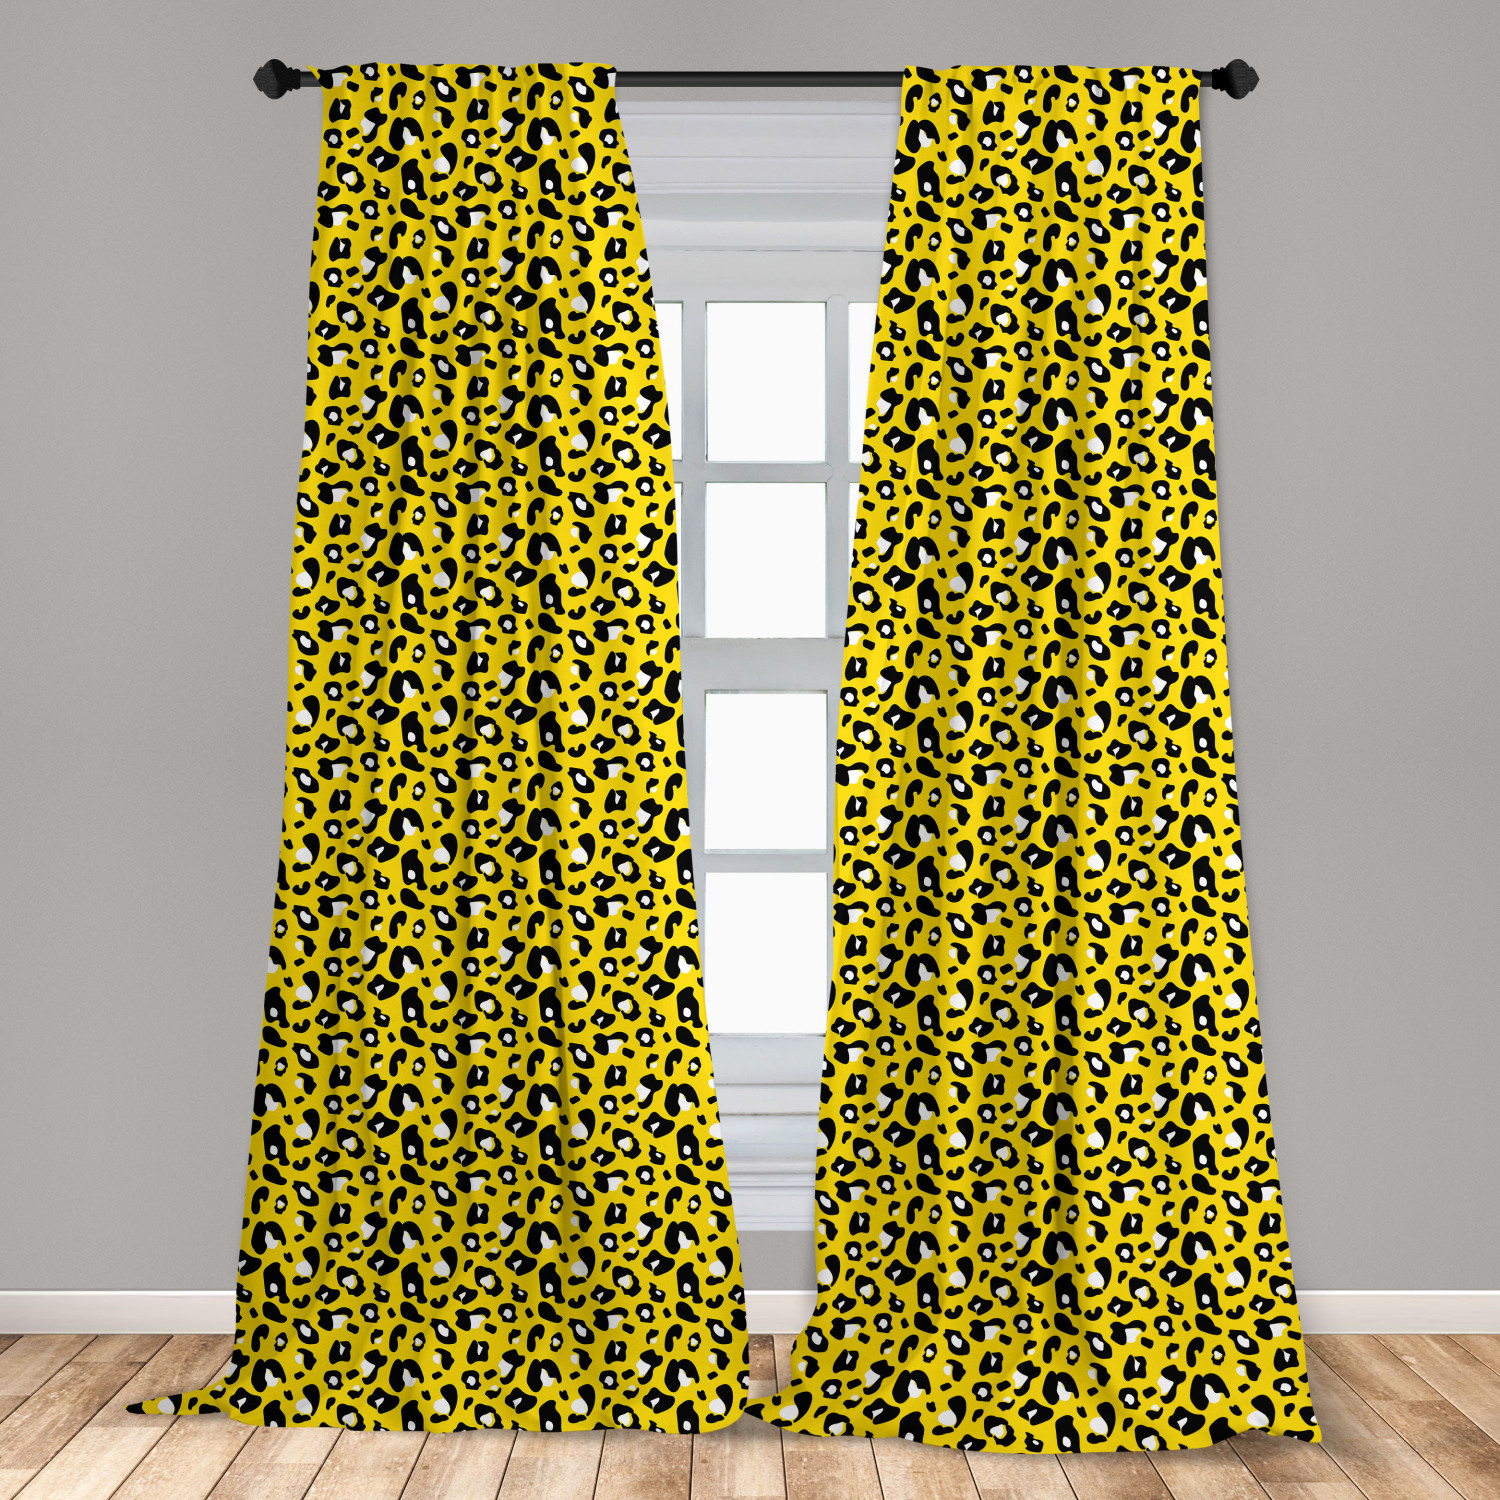 Leopard Print Microfiber Curtains 2 Panel Set for Living Room Bedroom in 3 Sizes 